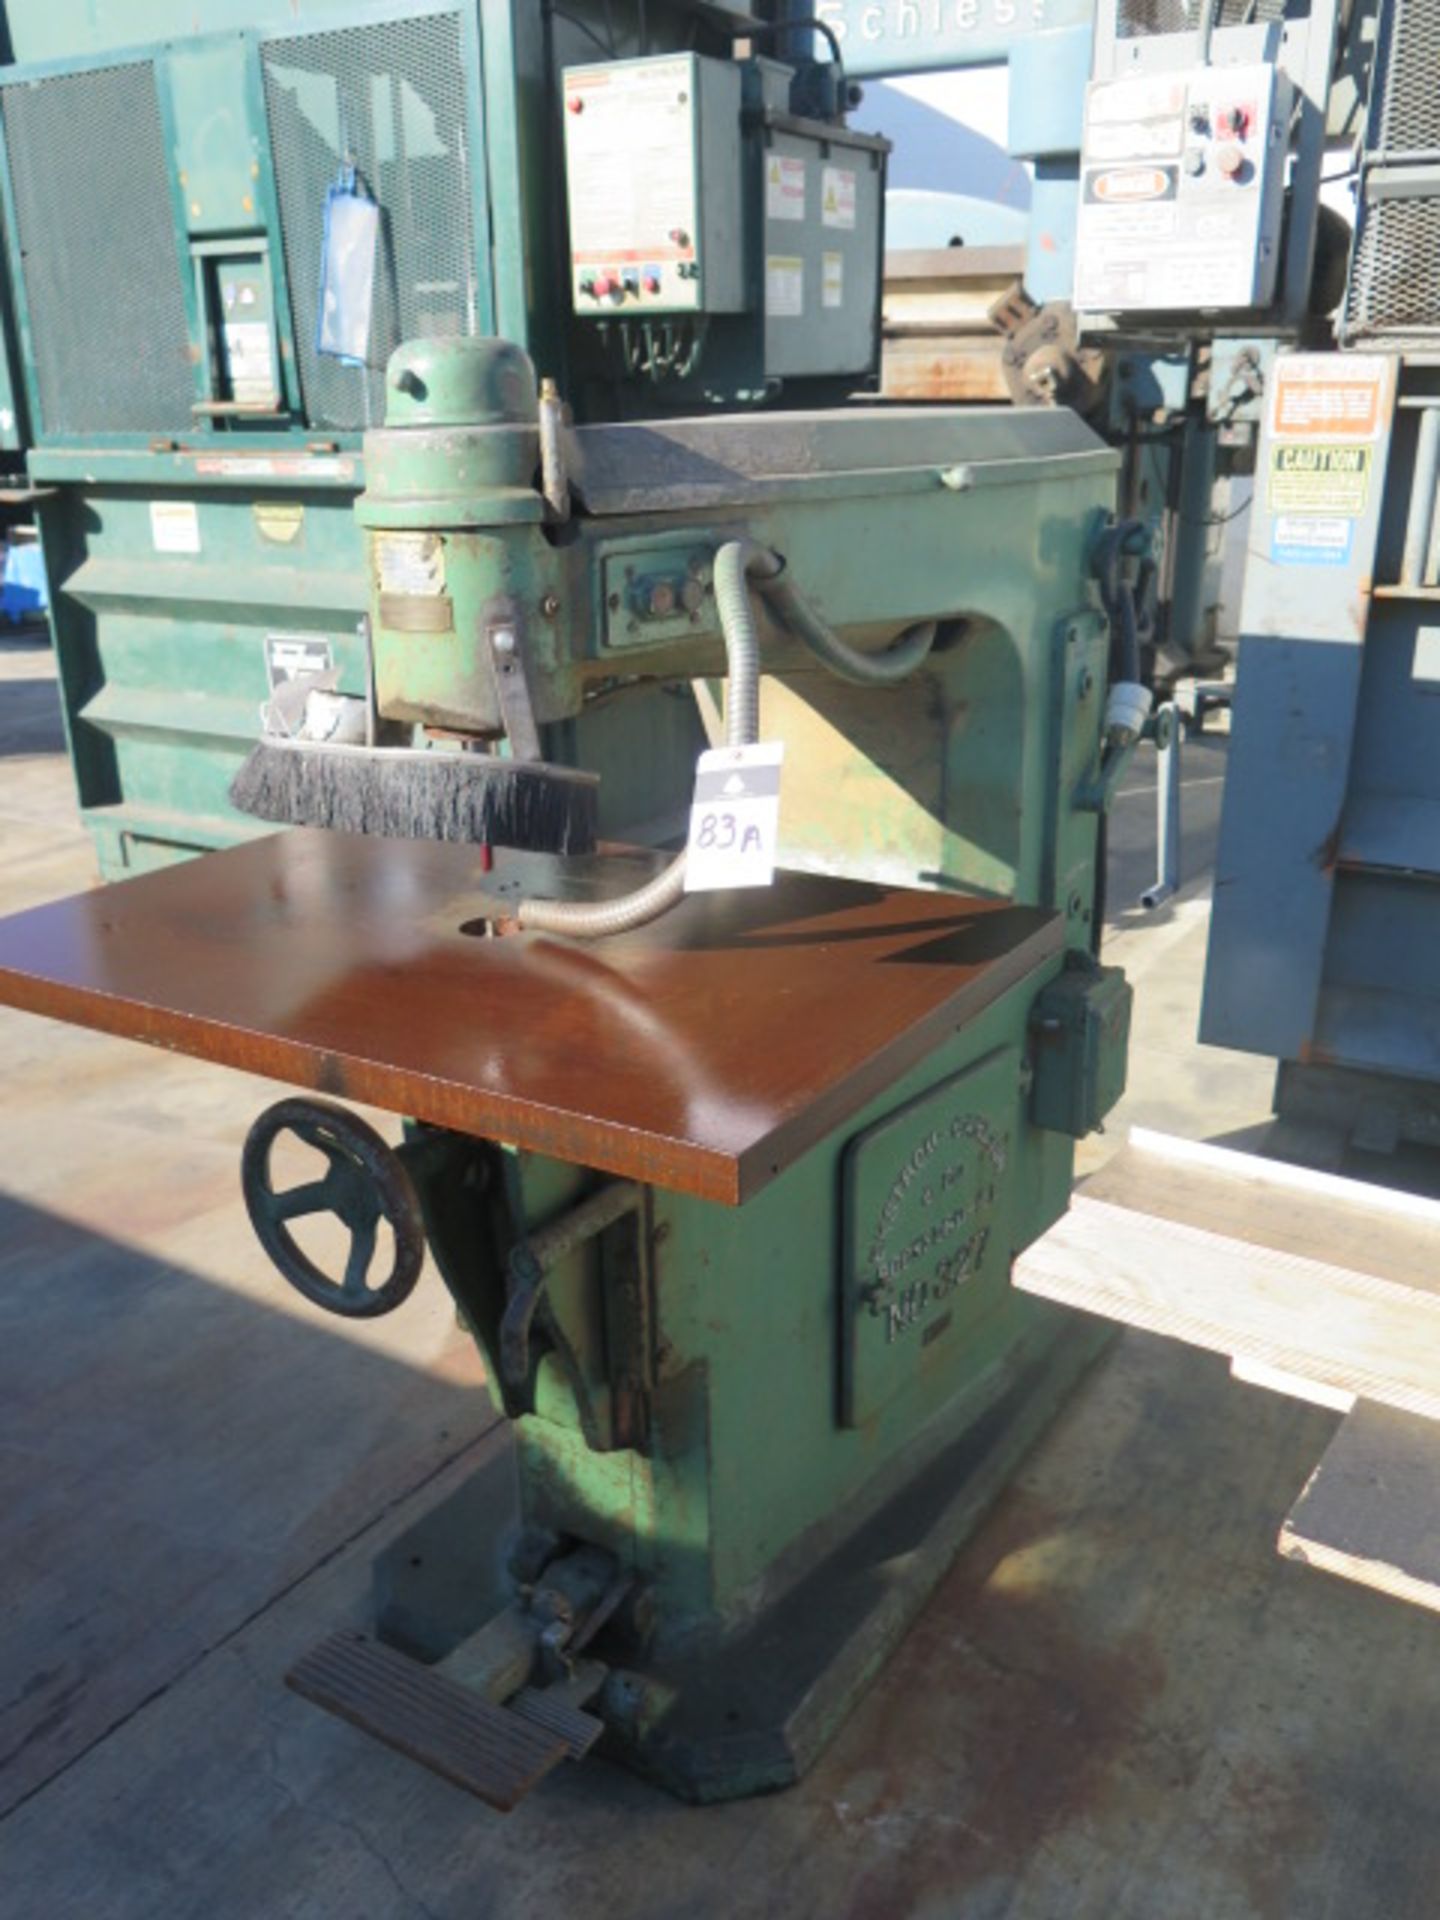 Ekstrom-Calrson No. 327 Pin Router s/n 327-510 w/ 20,000-10,000 RPM, 28" Throat, 24" x 36" Table - Image 2 of 5